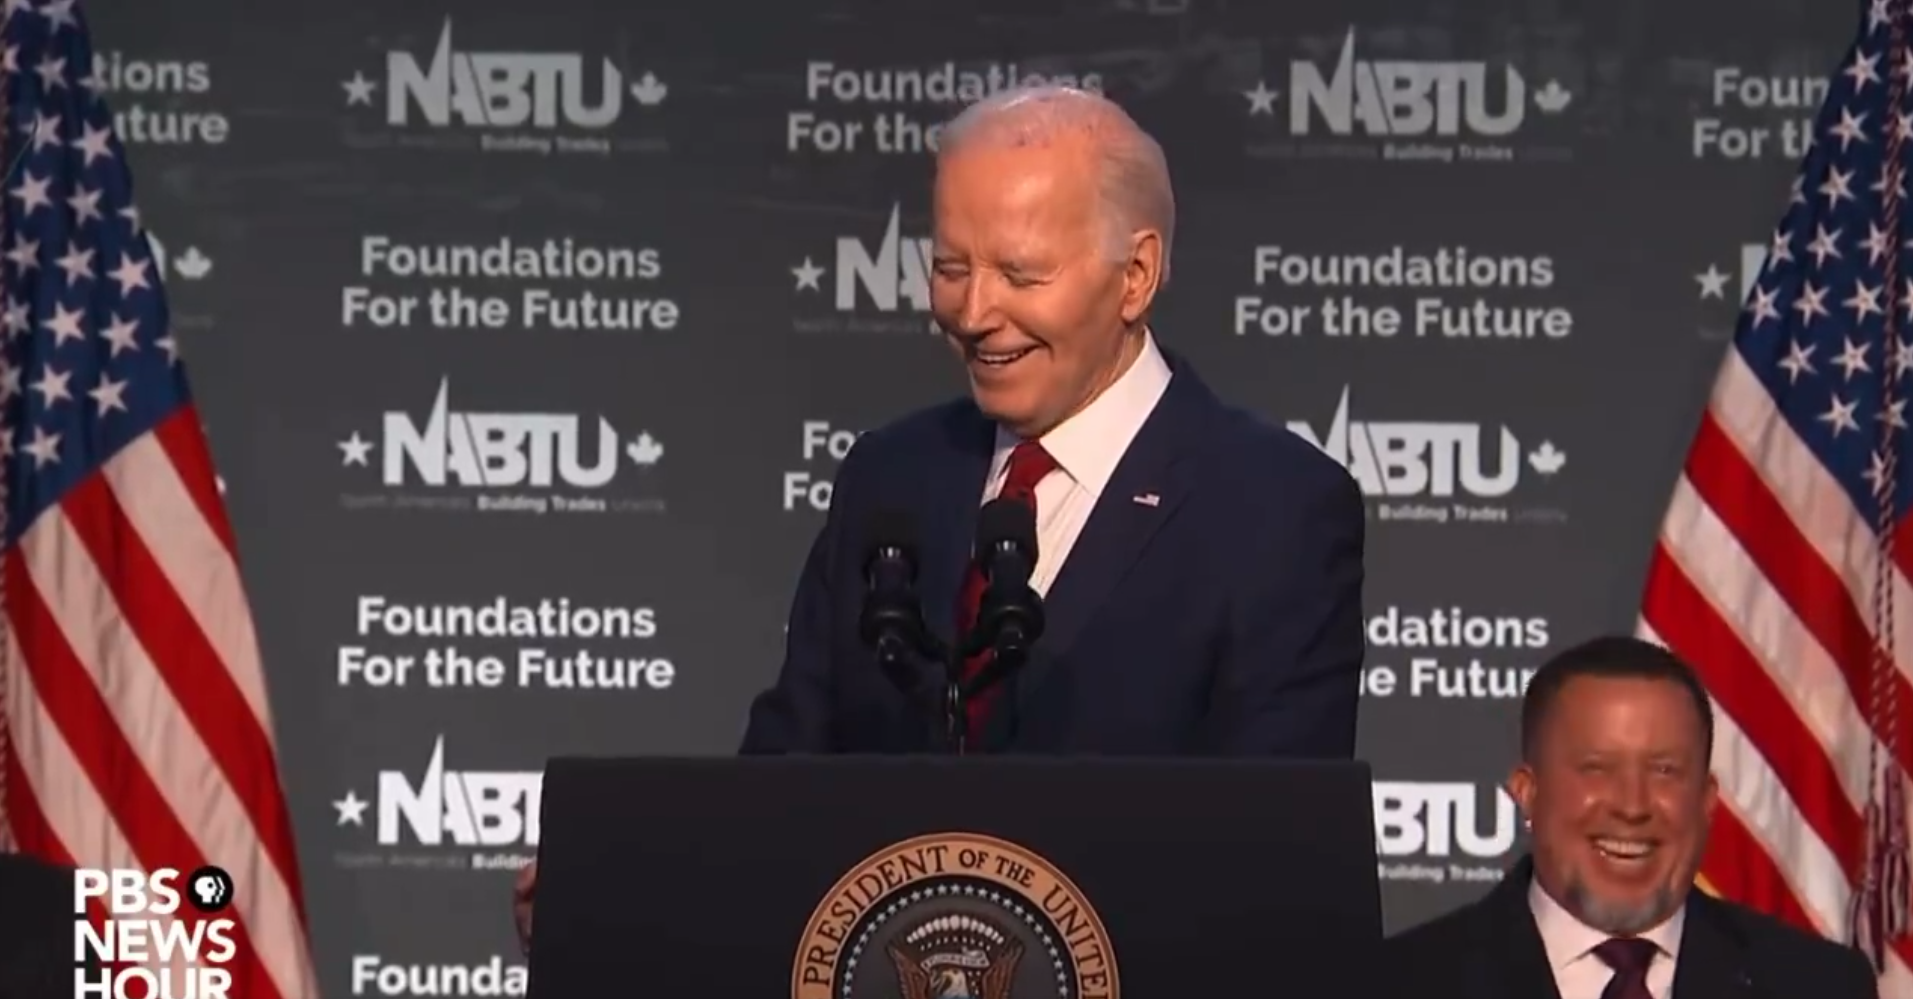 Biden Mocks Trump With COVID Bleach Claim: ‘He Missed, It All Went to His Hair’